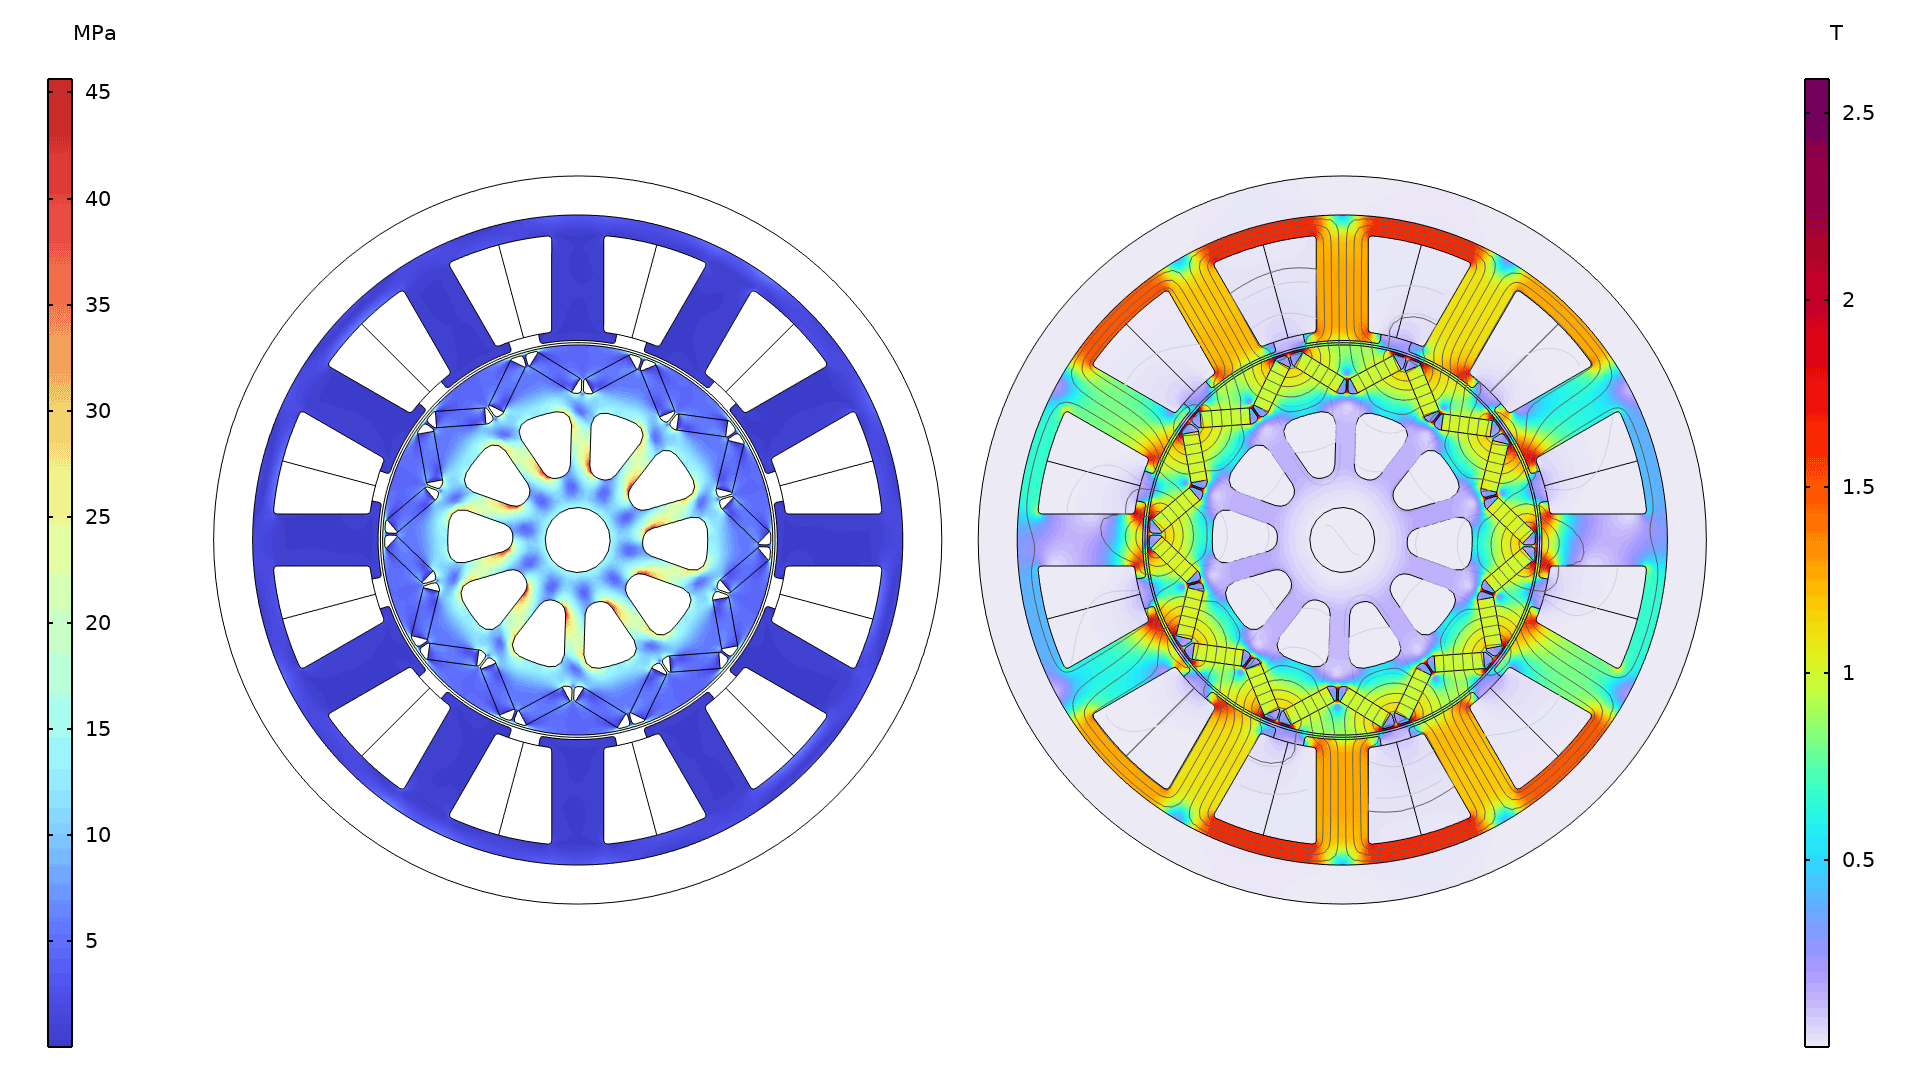 Two motor models, with stress shown in the left model and the magnetic field shown on the right.